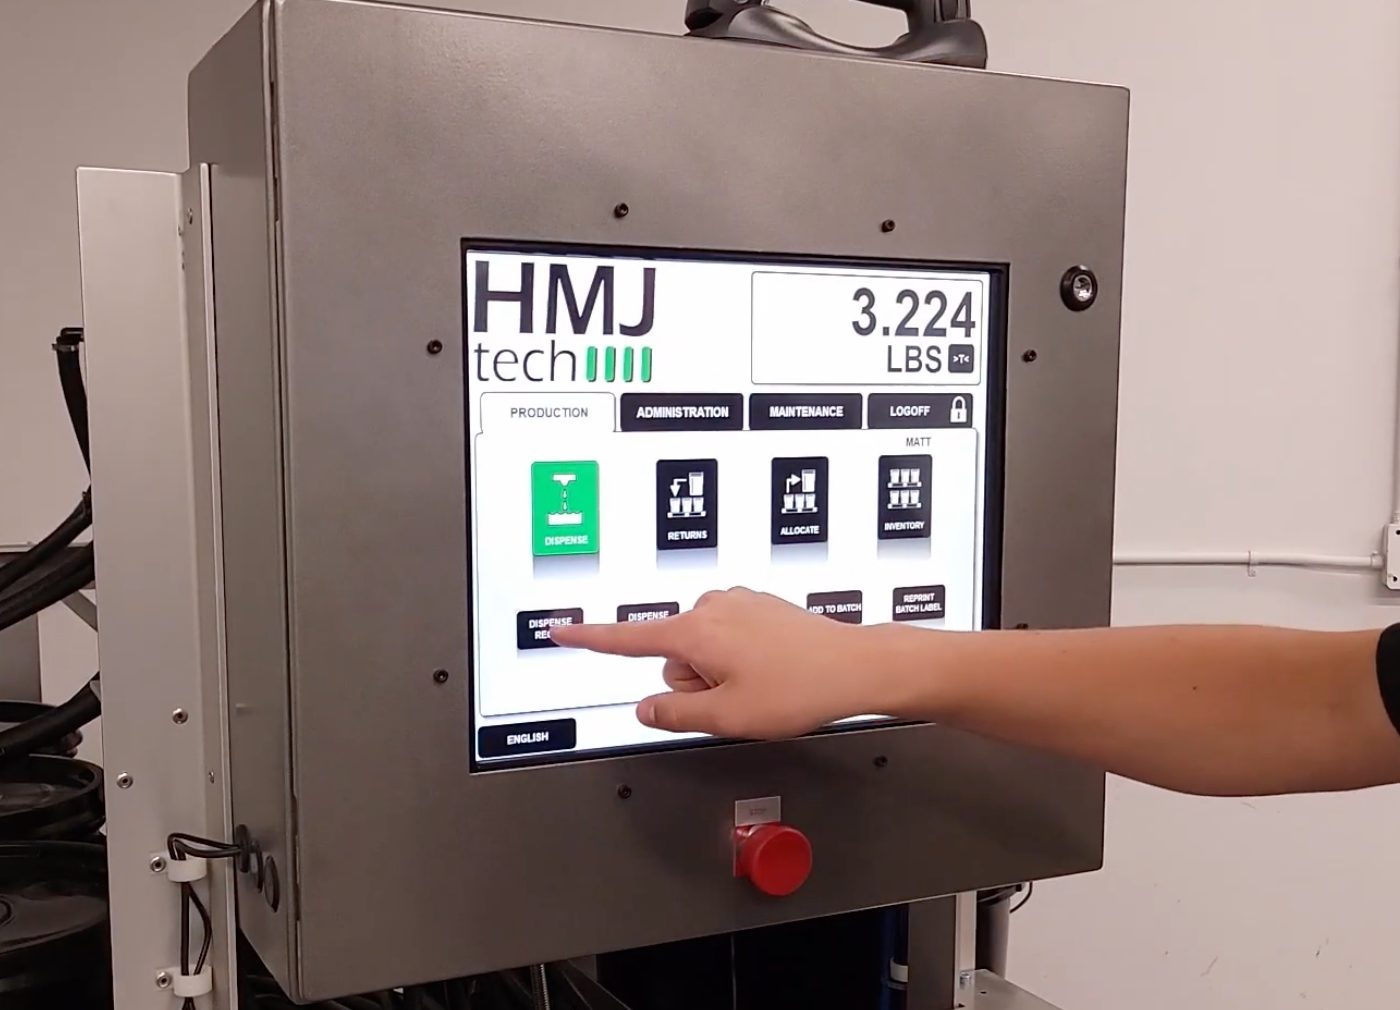 HMJ tech easy to use software screen for dispensing